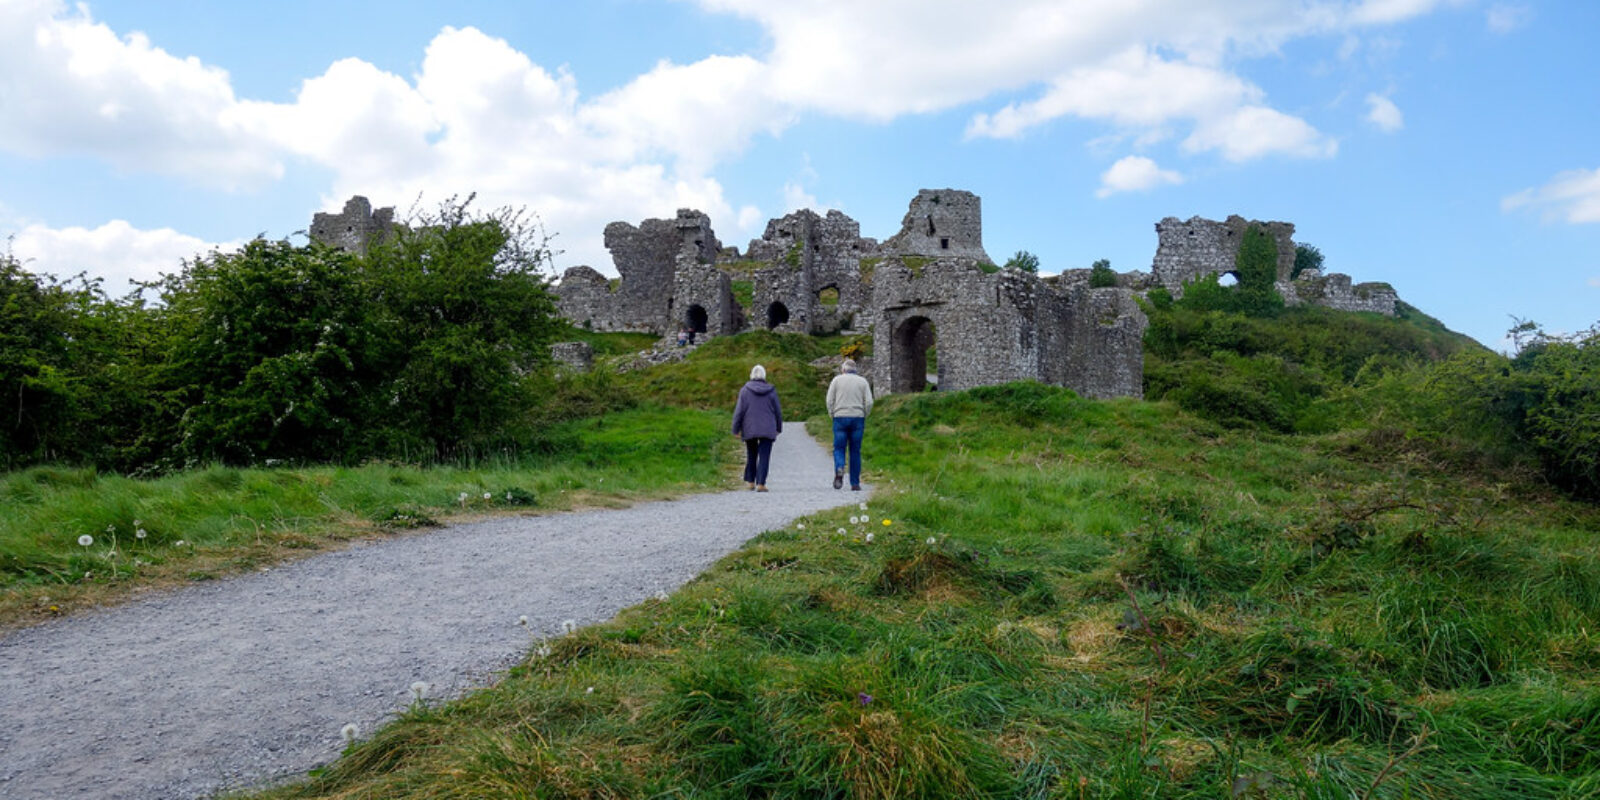 A couple during one of the senior travel spots in Ireland